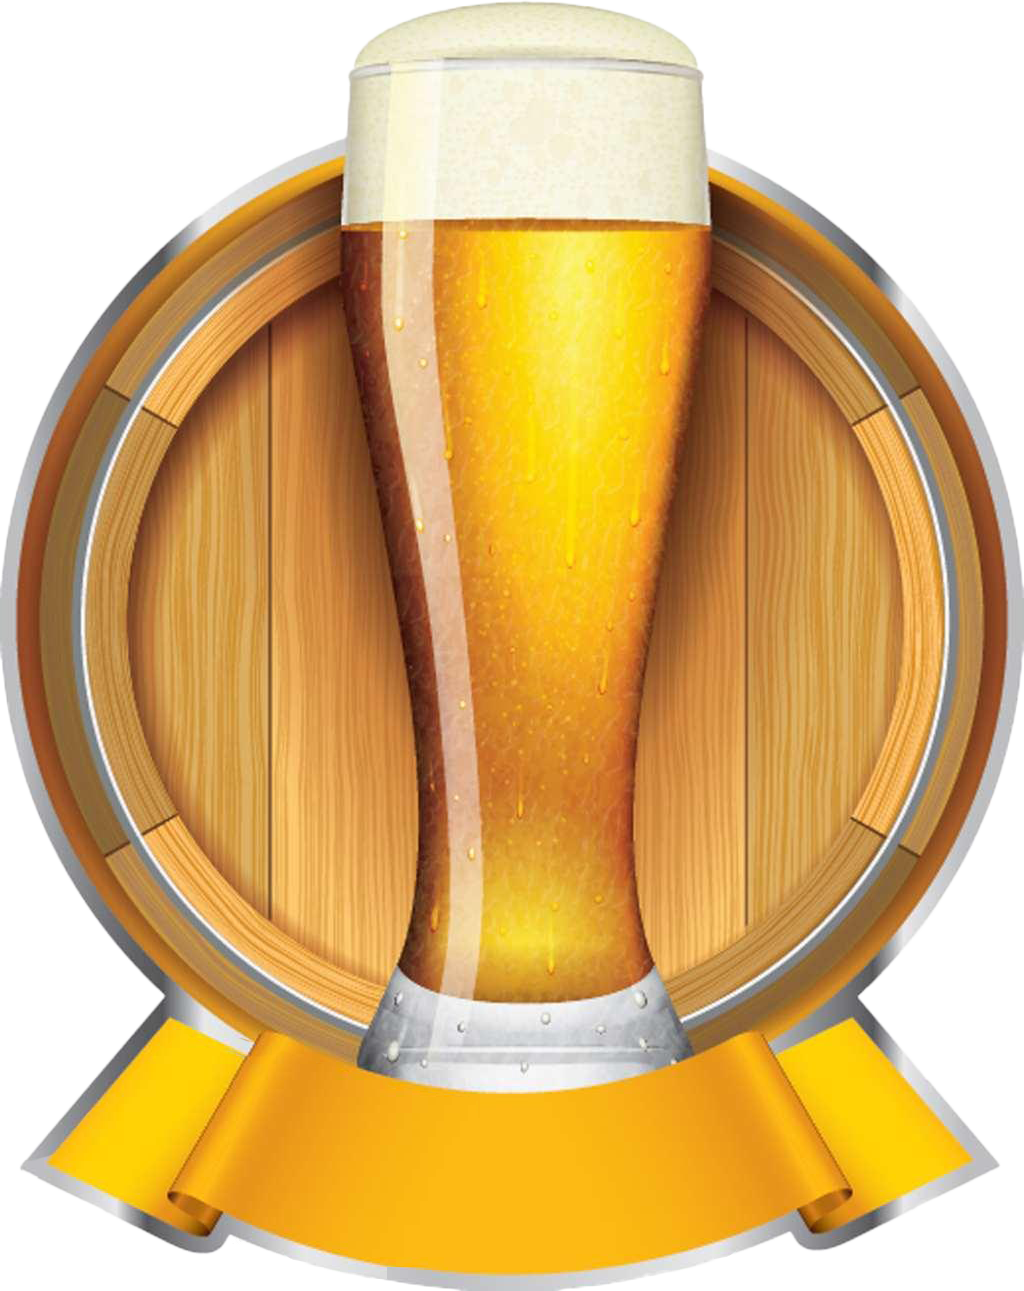 Beer Circle Barrel Icon PNG Image High Quality Clipart